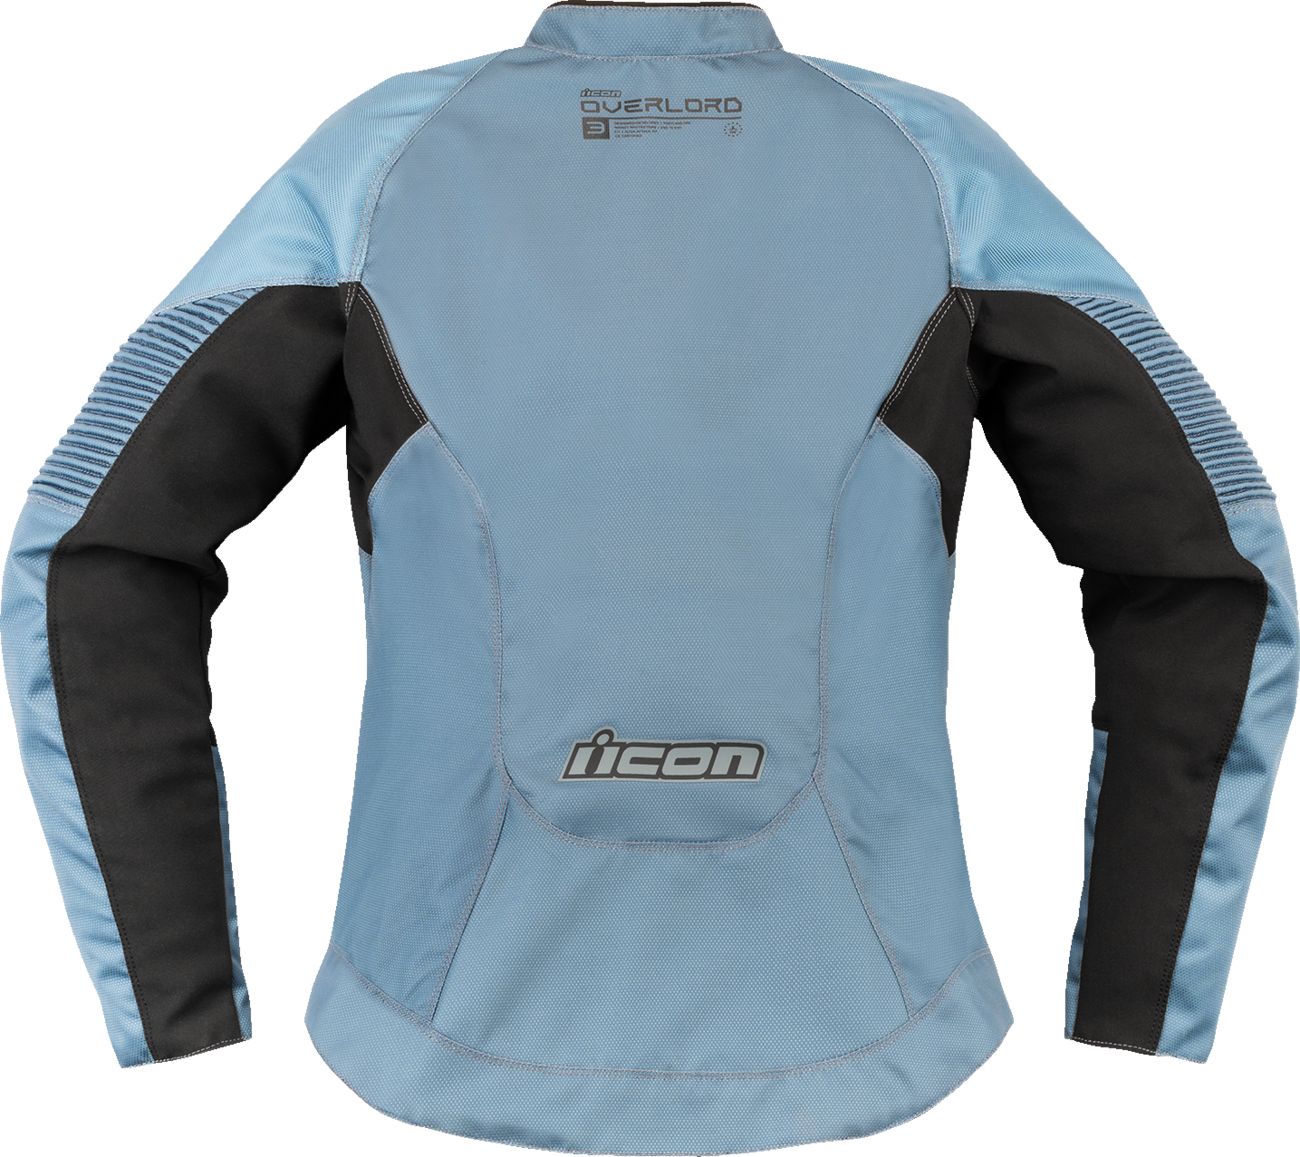 ICON Women's Overlord3™ CE Jacket - Blue - 2XL 2822-1602